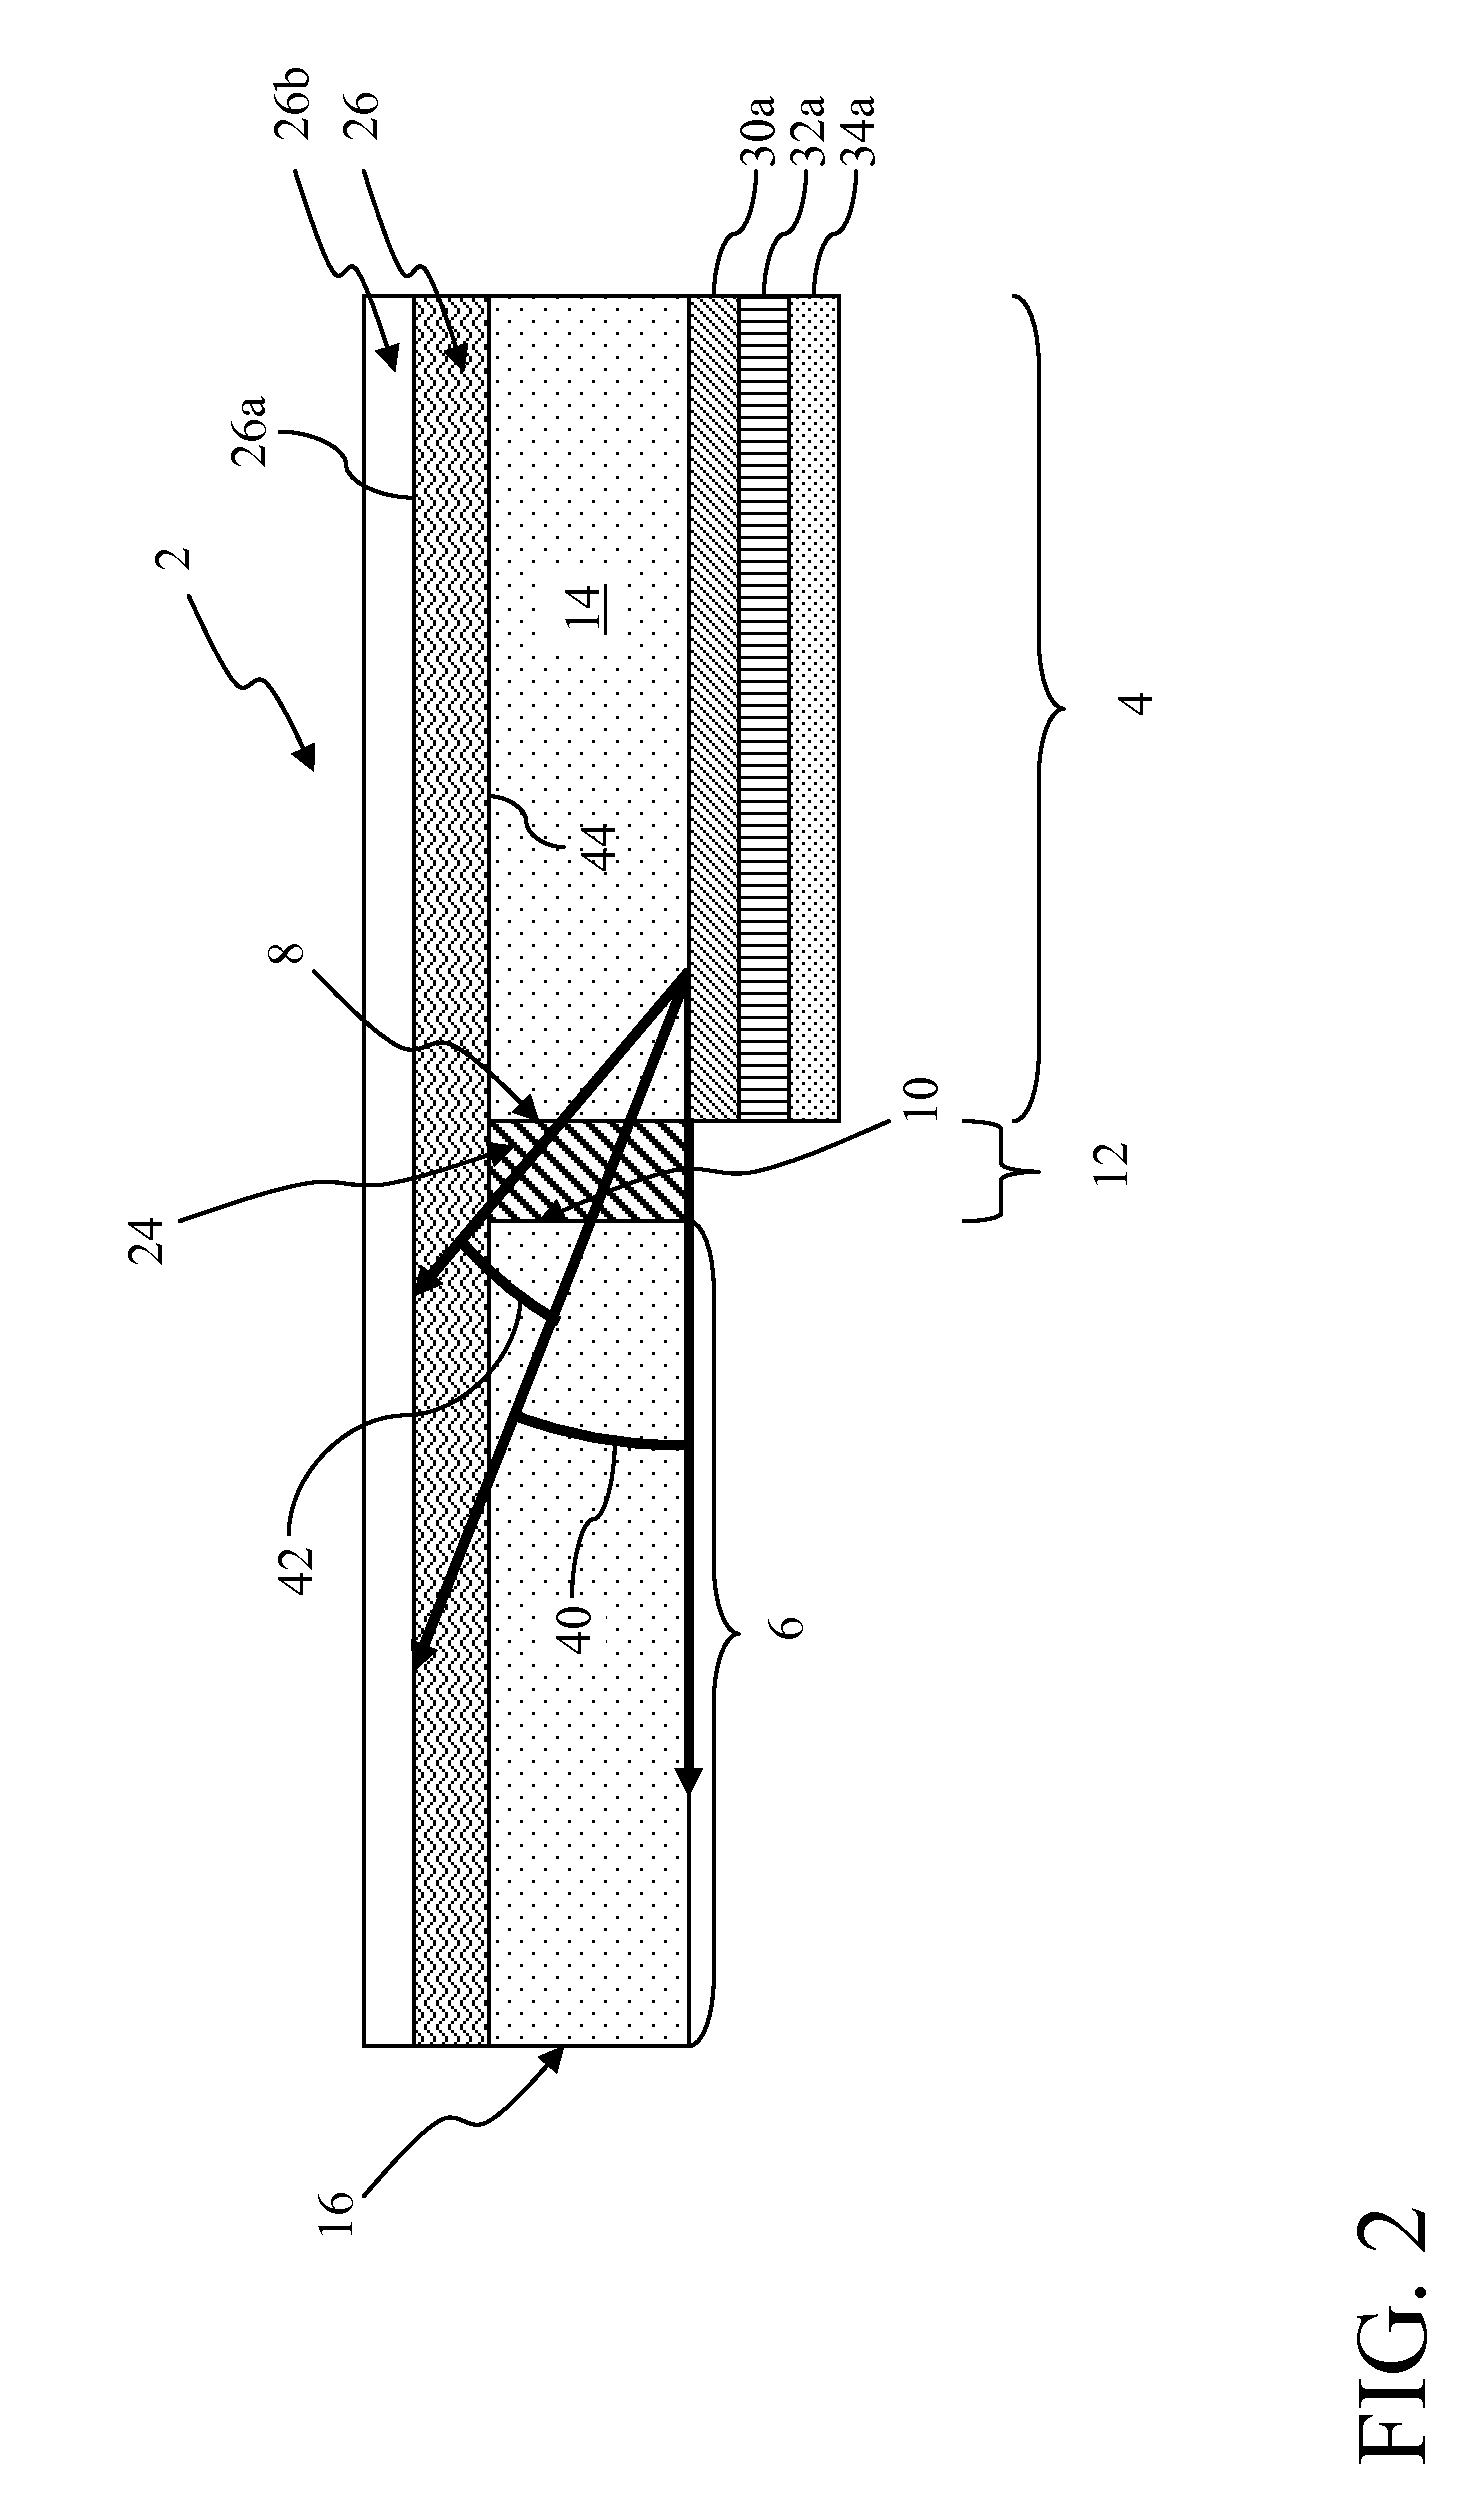 Tiled electroluminescent device with filled gaps